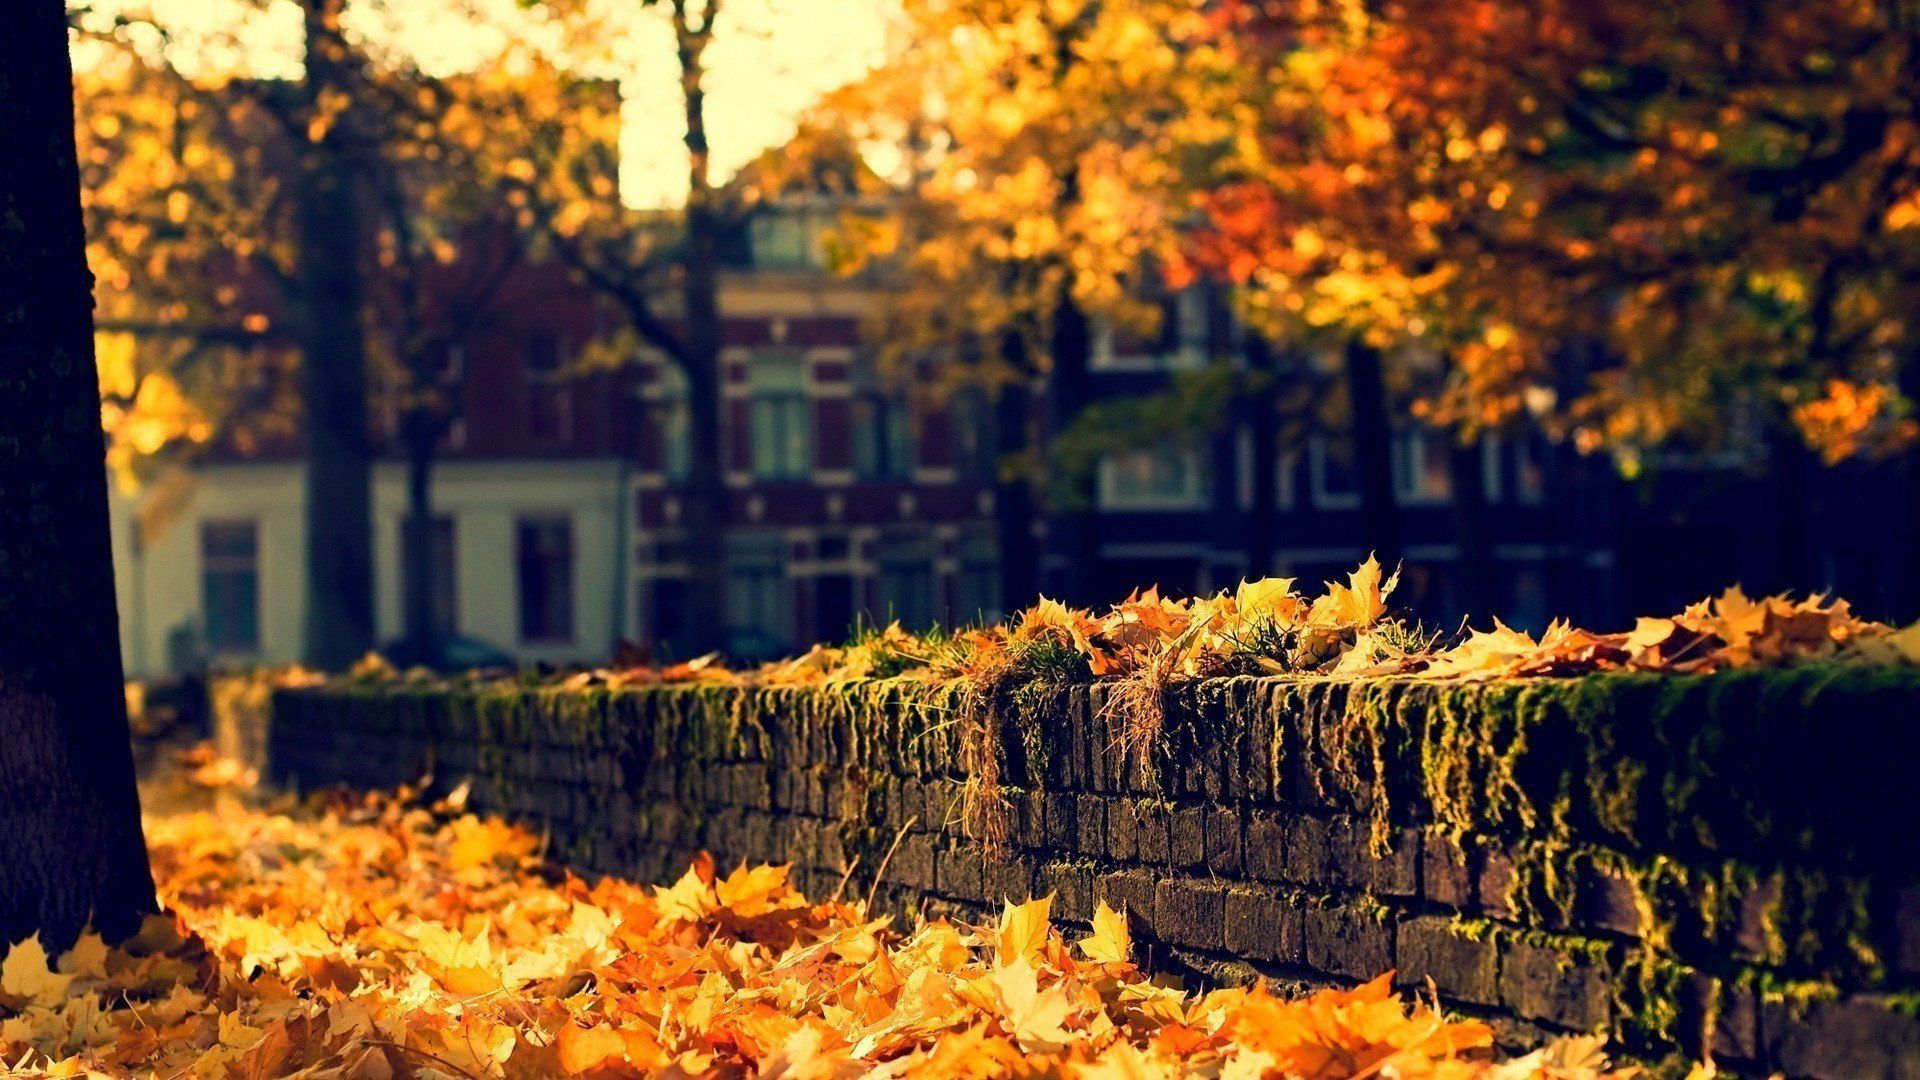 Small Town Wallpaper Small Town Image and Wallpaper for Mac. Desktop wallpaper fall, Fall picture nature, Fall wallpaper